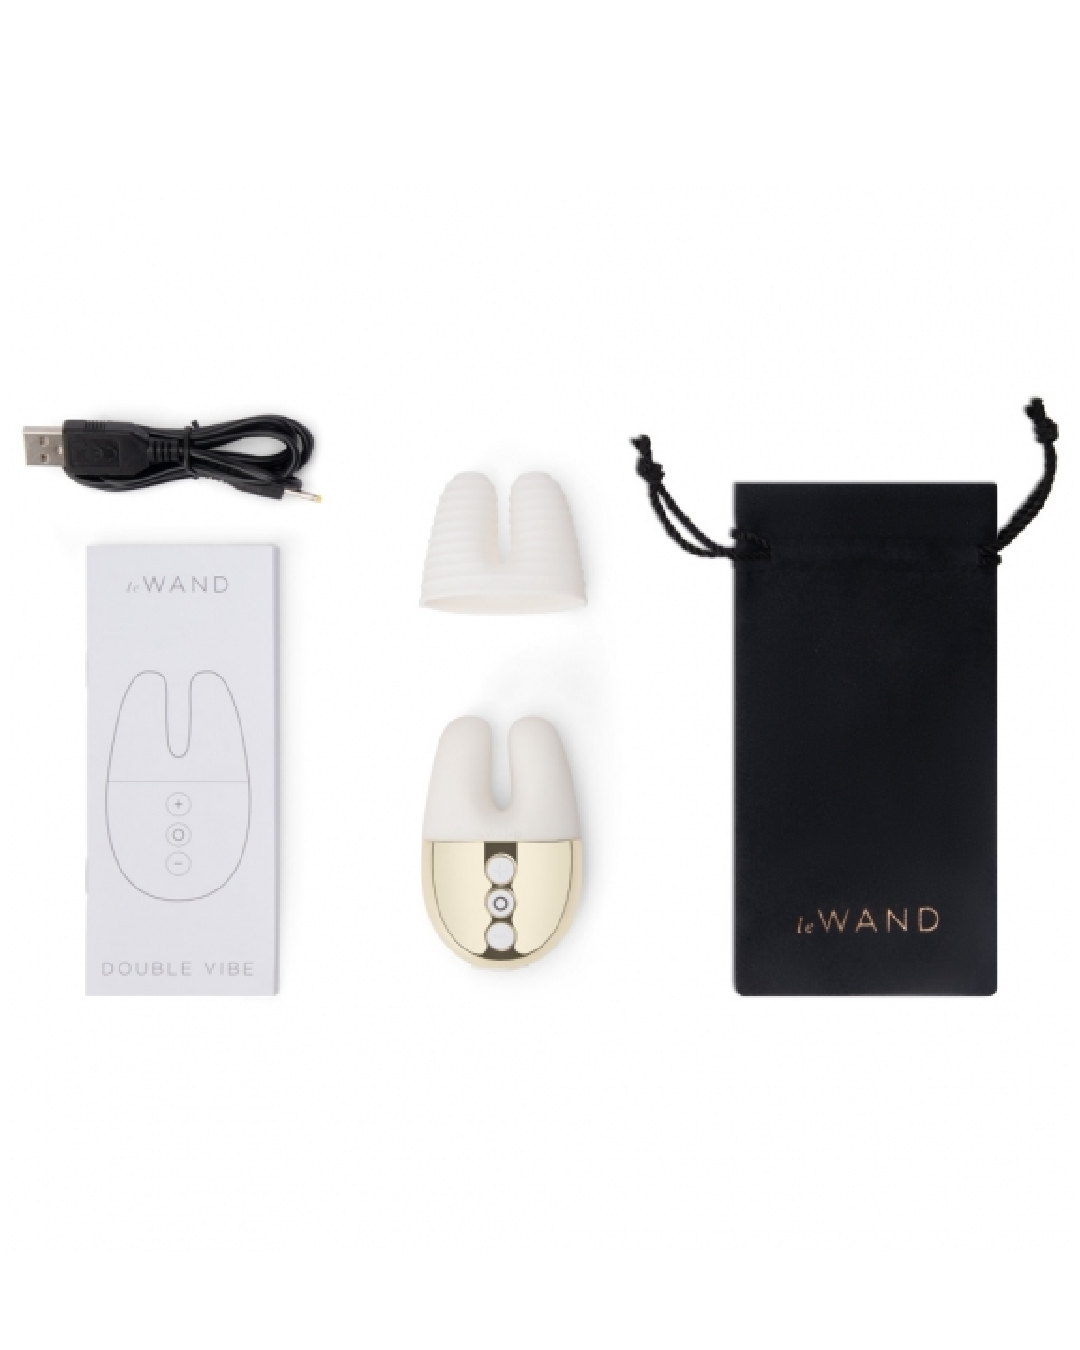 Le Wand Chrome Double Vibrator Limited Edition White Gold vibe pouch attachment manual and charger 